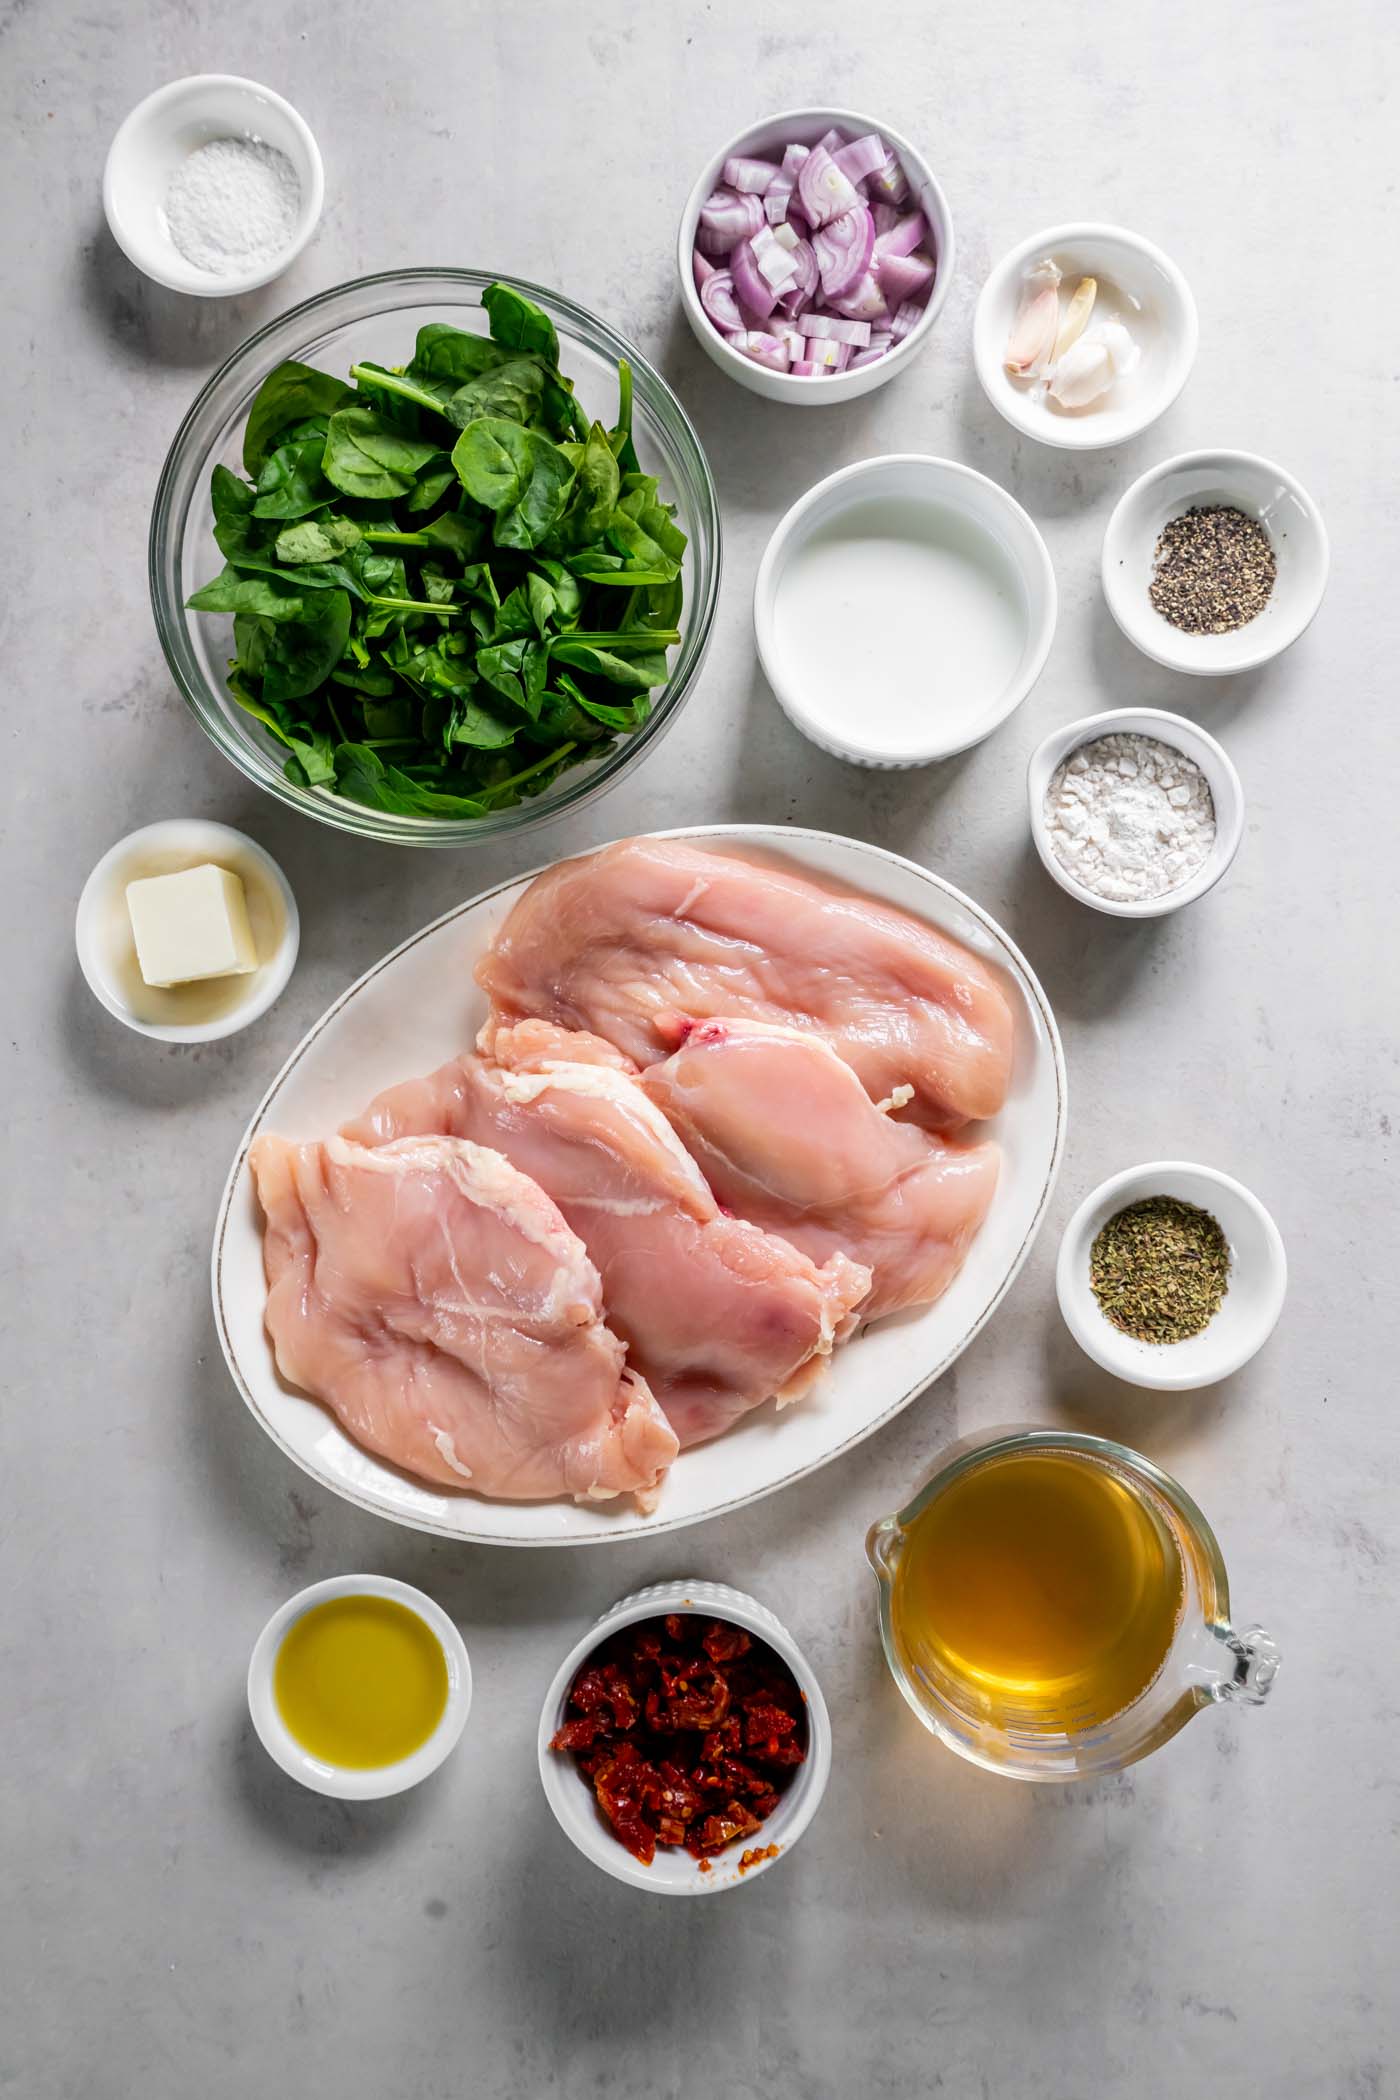 Ingredients for Tuscan chicken recipe.